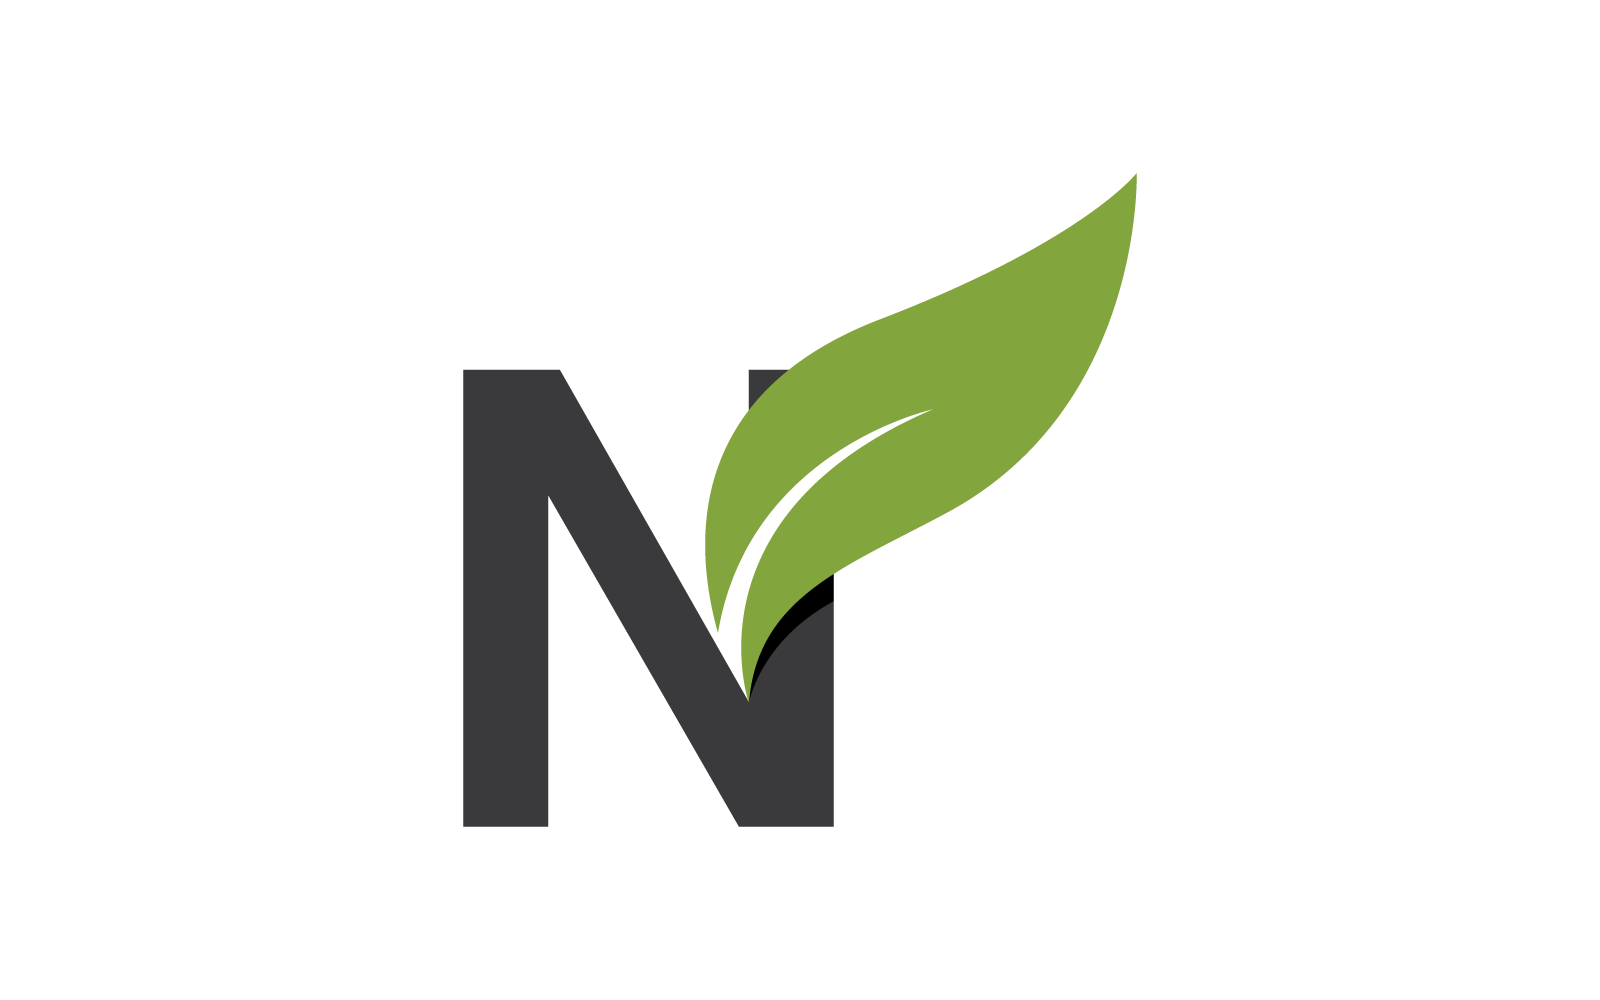 N Initial letter with green leaf logo vector flat design